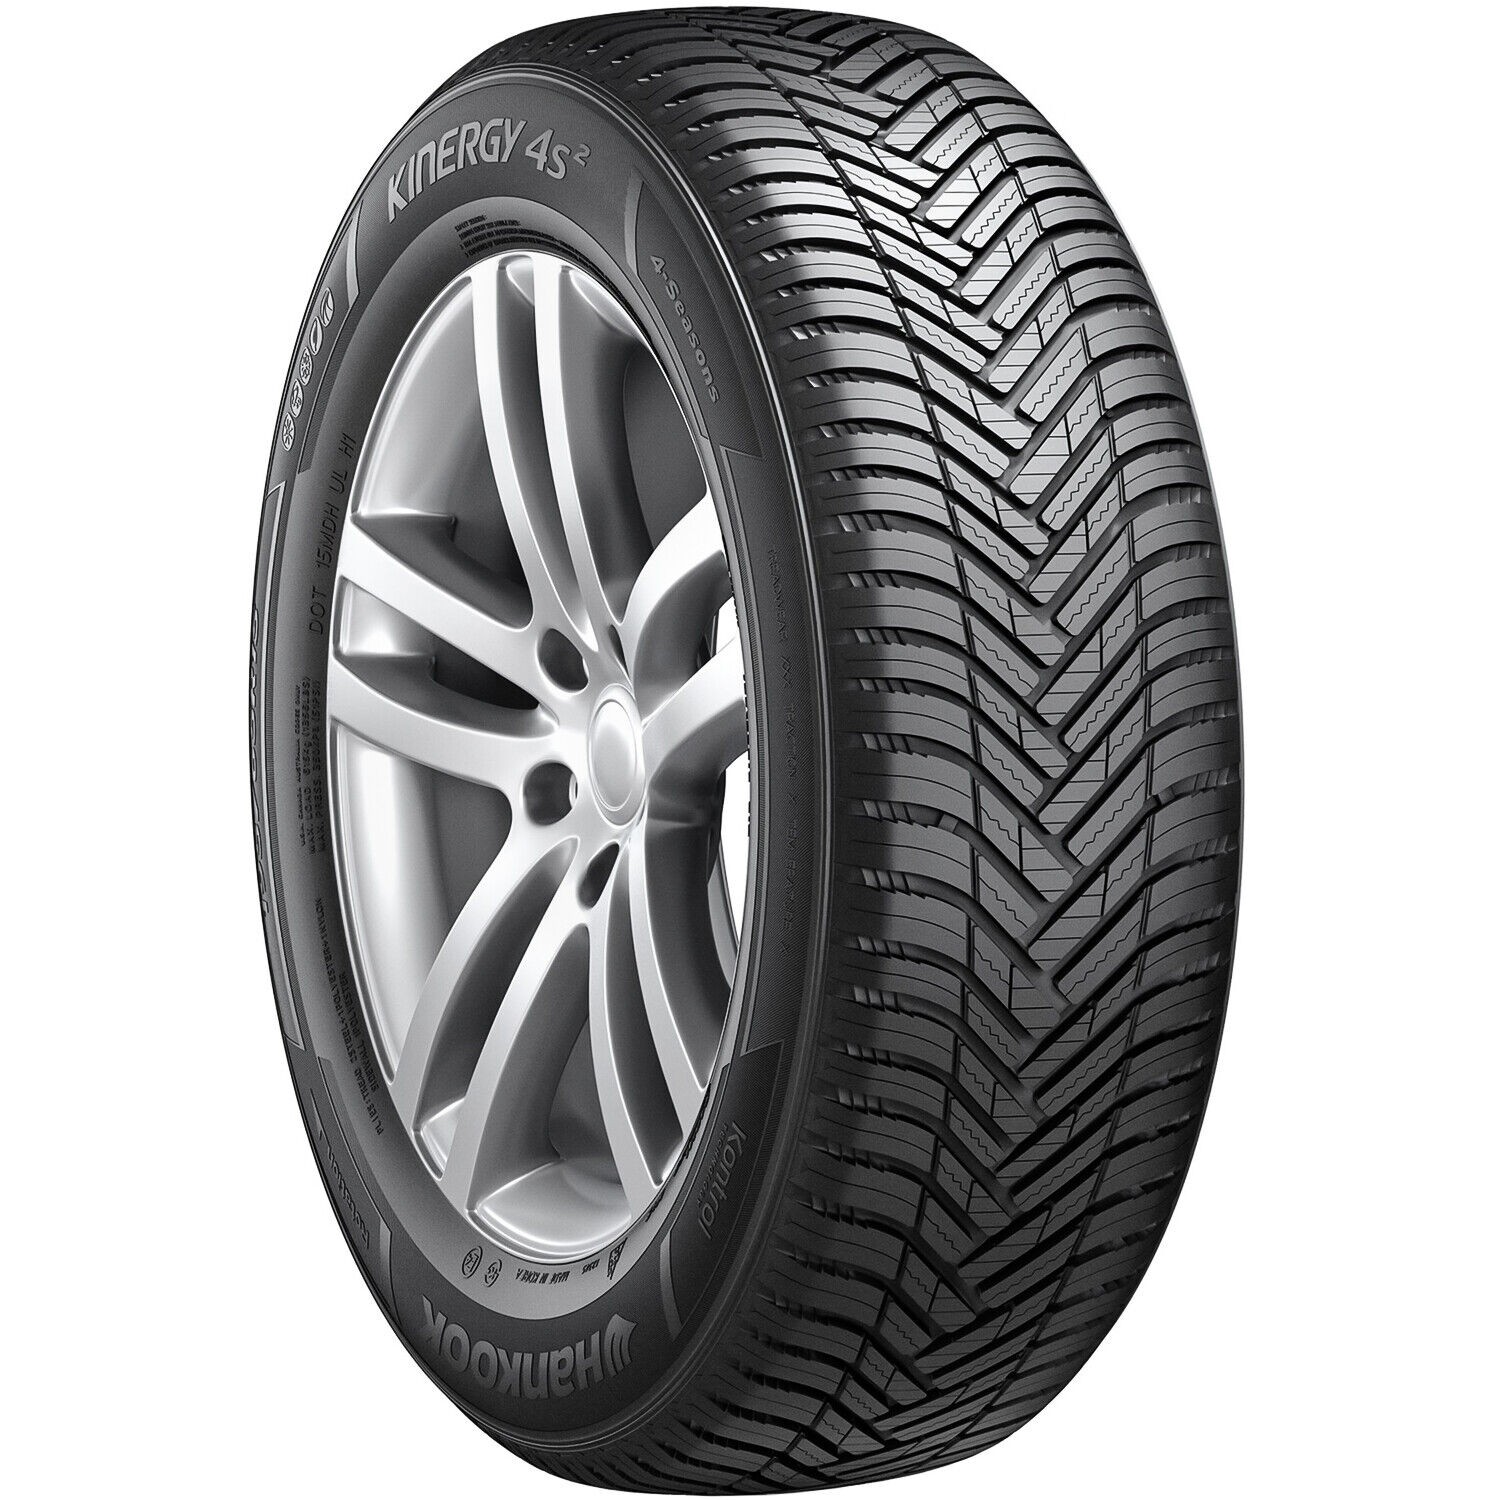 2 Tires Hankook Kinergy 4S2 215/60R16 95V All Weather